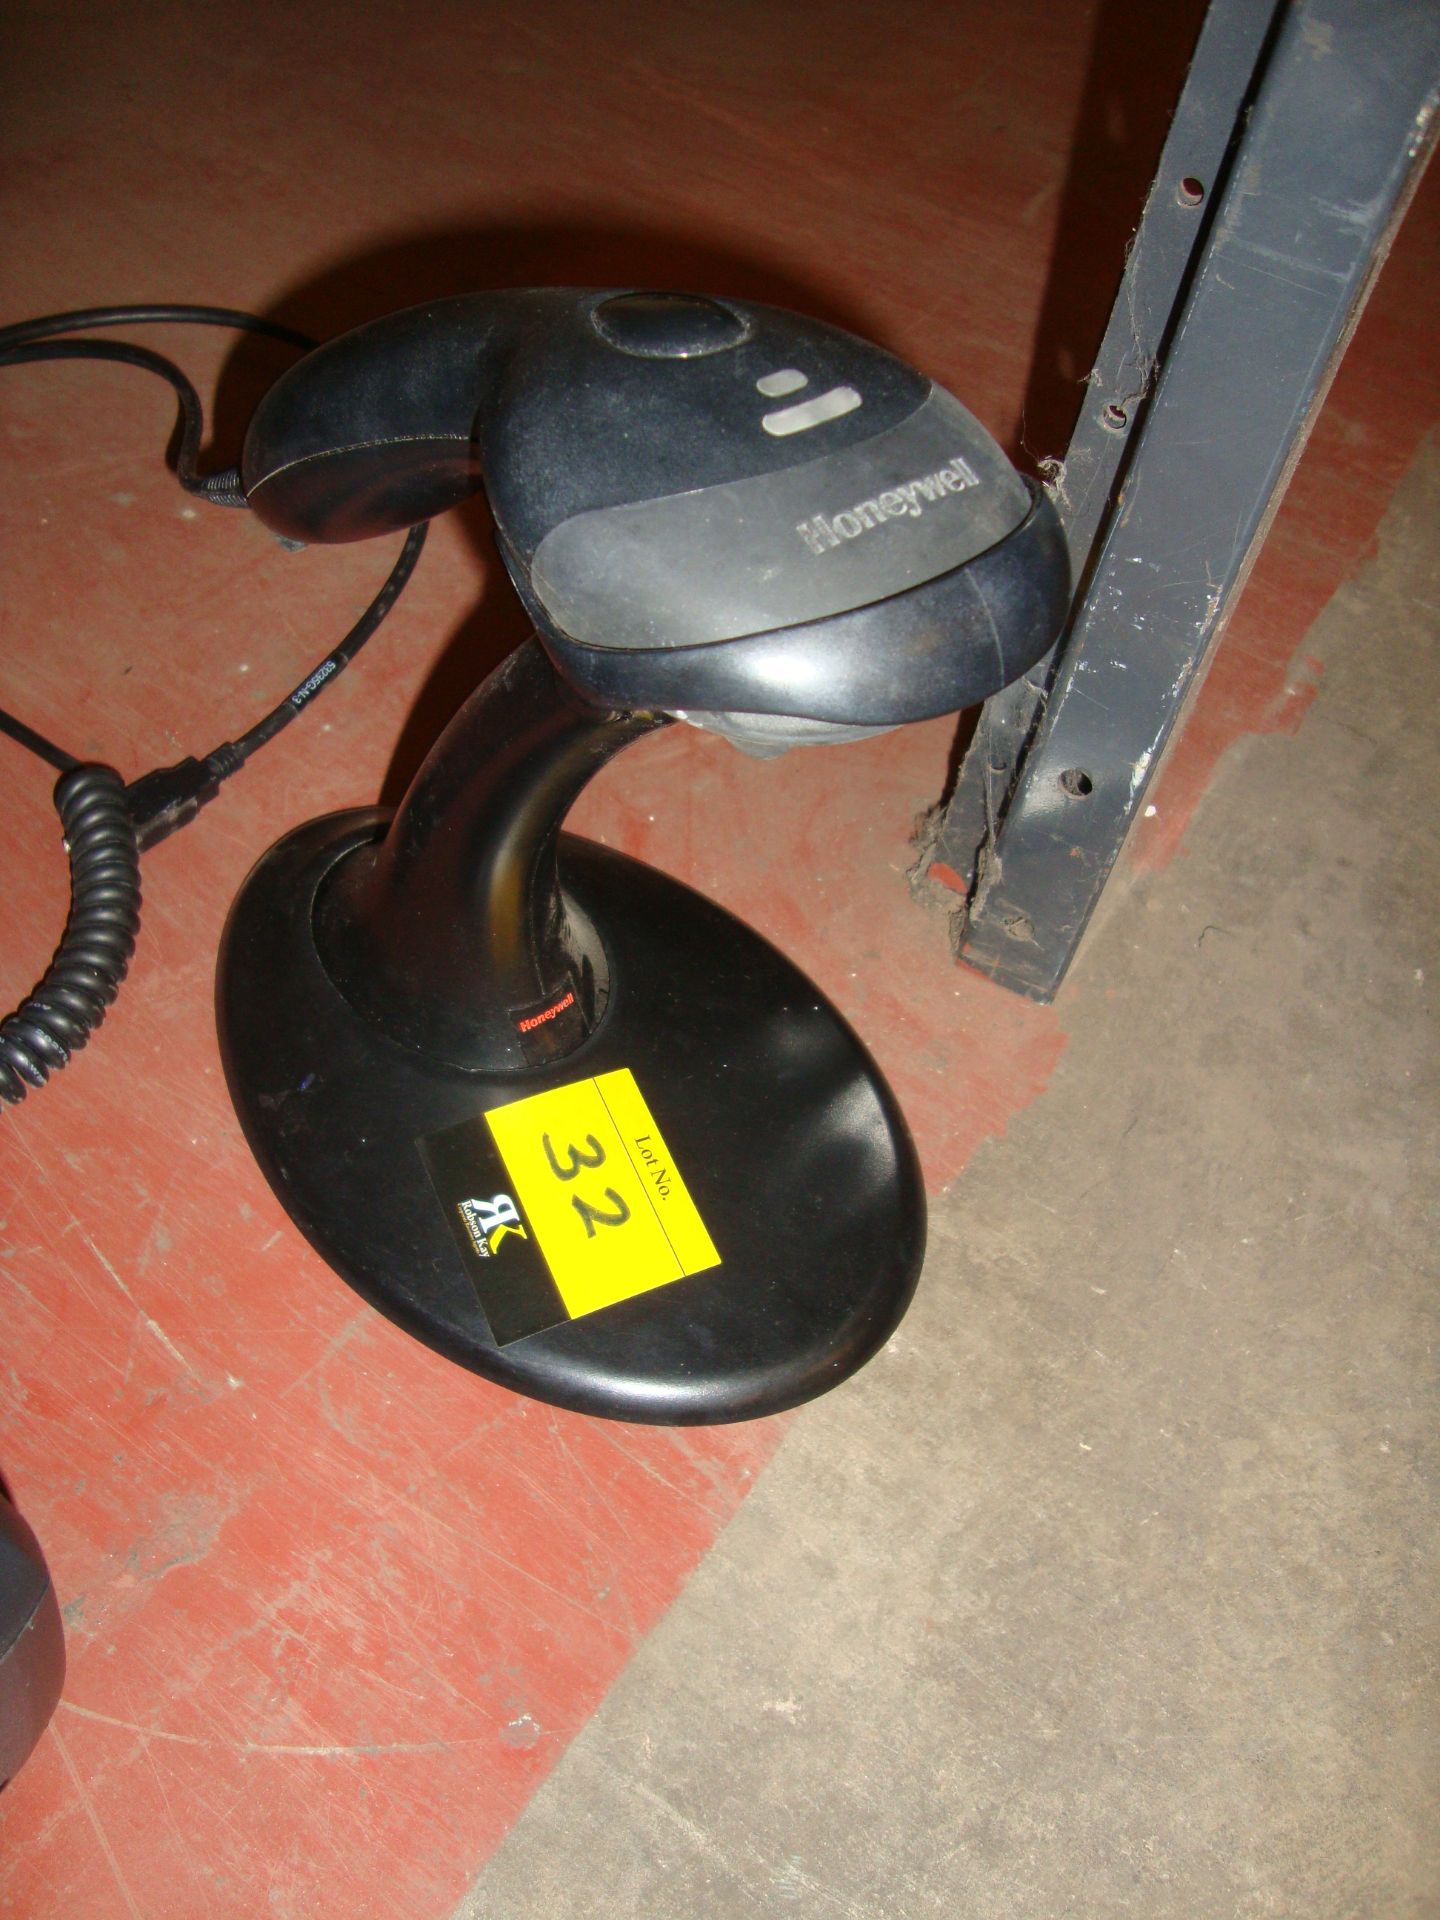 Honeywell model MS9540 hand-held barcode scanner including desktop stand for use with same